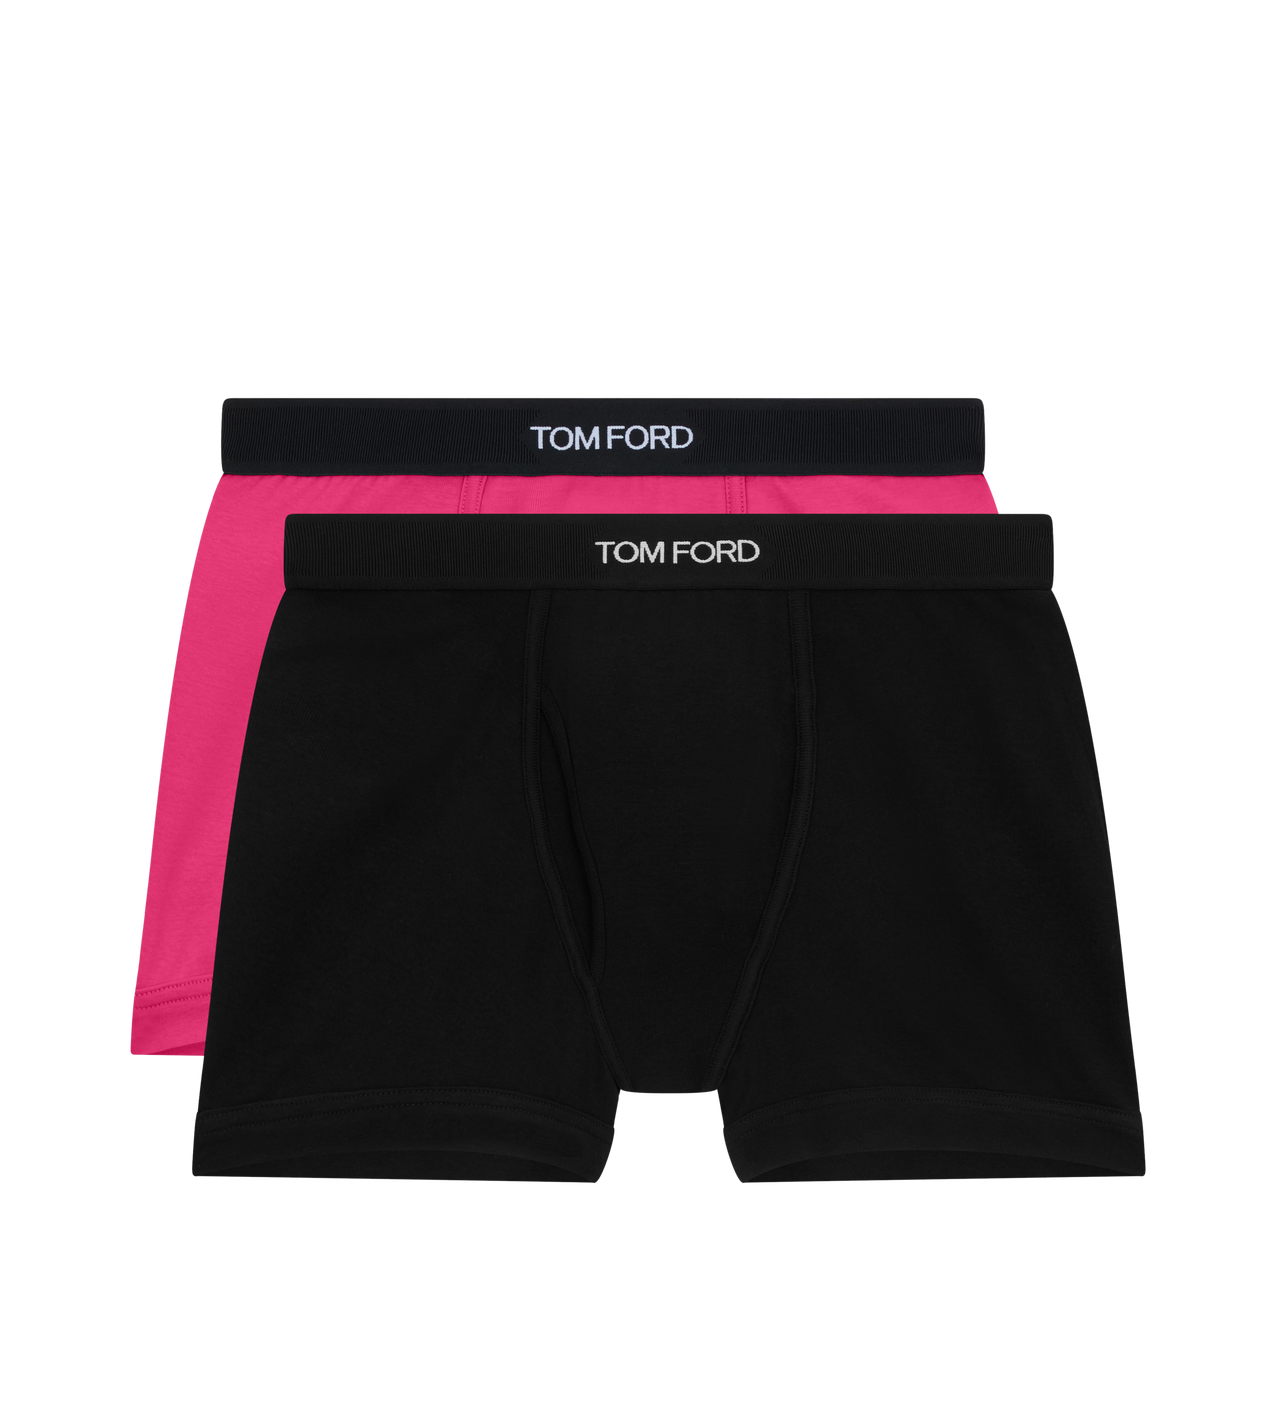 COTTON BOXER BRIEFS TWO PACK image number 0